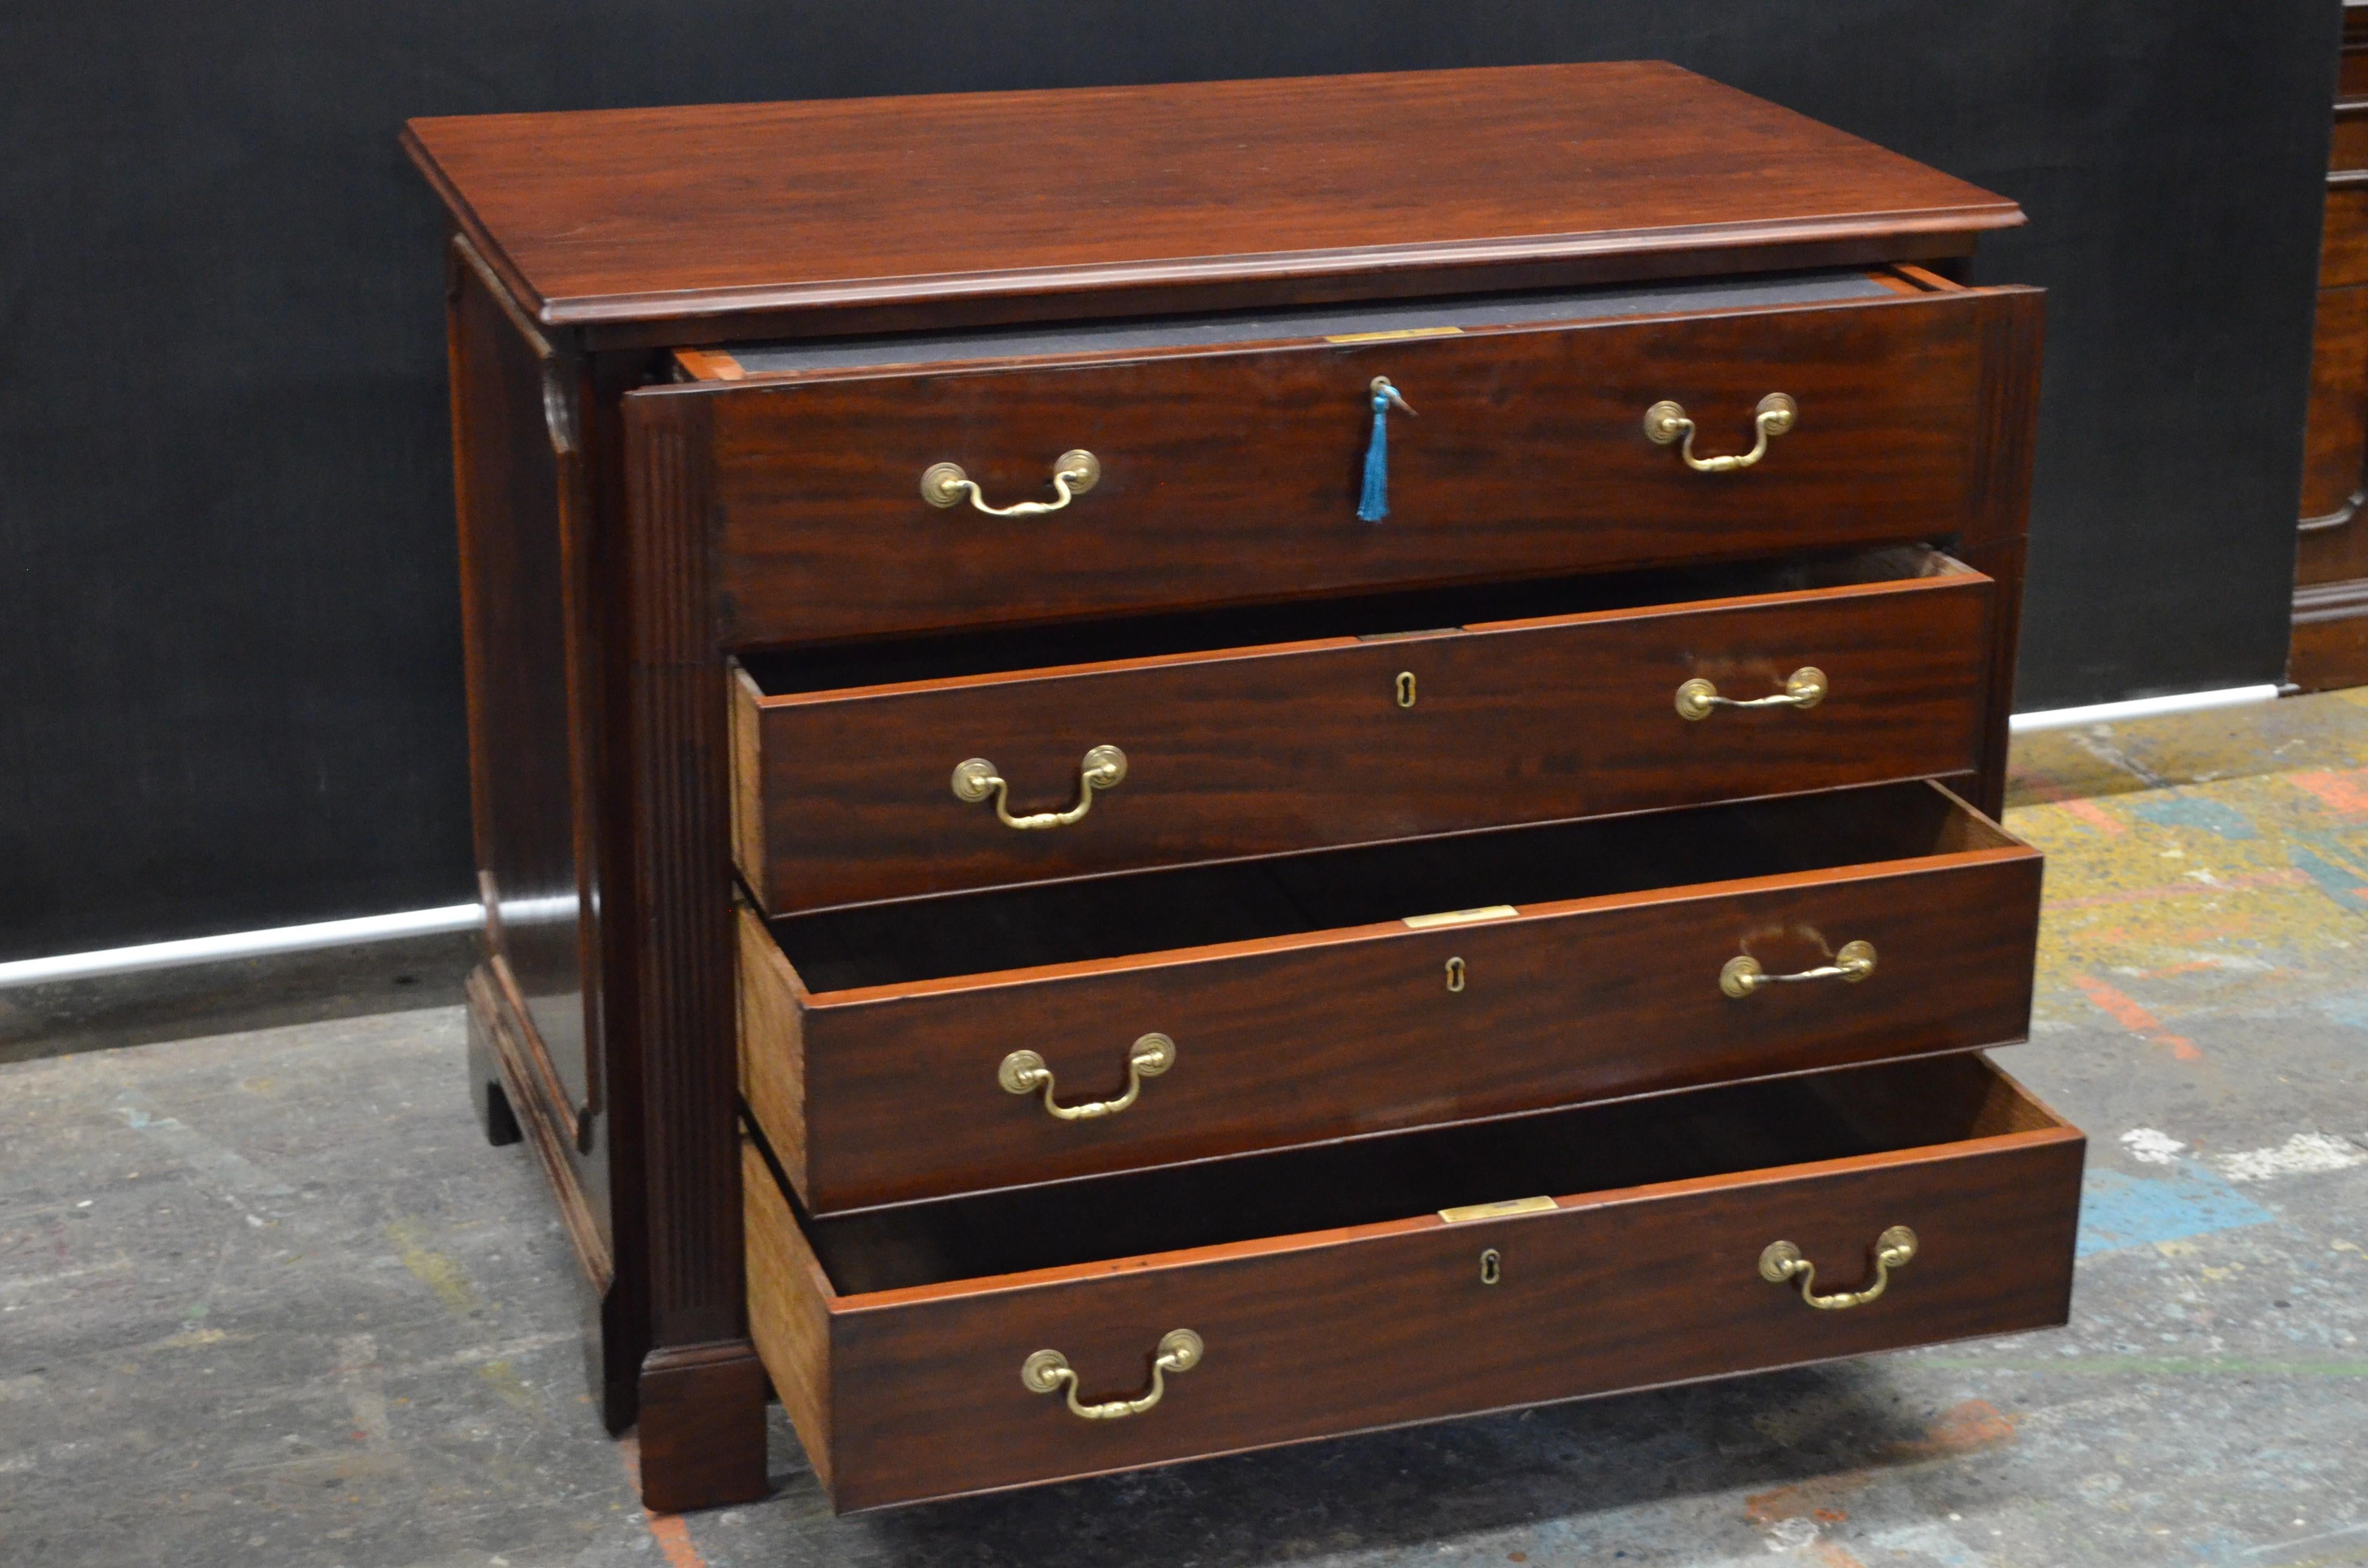 A Regal English Chippendale Metamorphic Chest having a Pull Out Writing Desk made in the Late 18th Century. The Georgian Chest has an unusual Faux Pair of Cabinet Doors on the back, so that the Metamorphic Desk can be used in the center of the